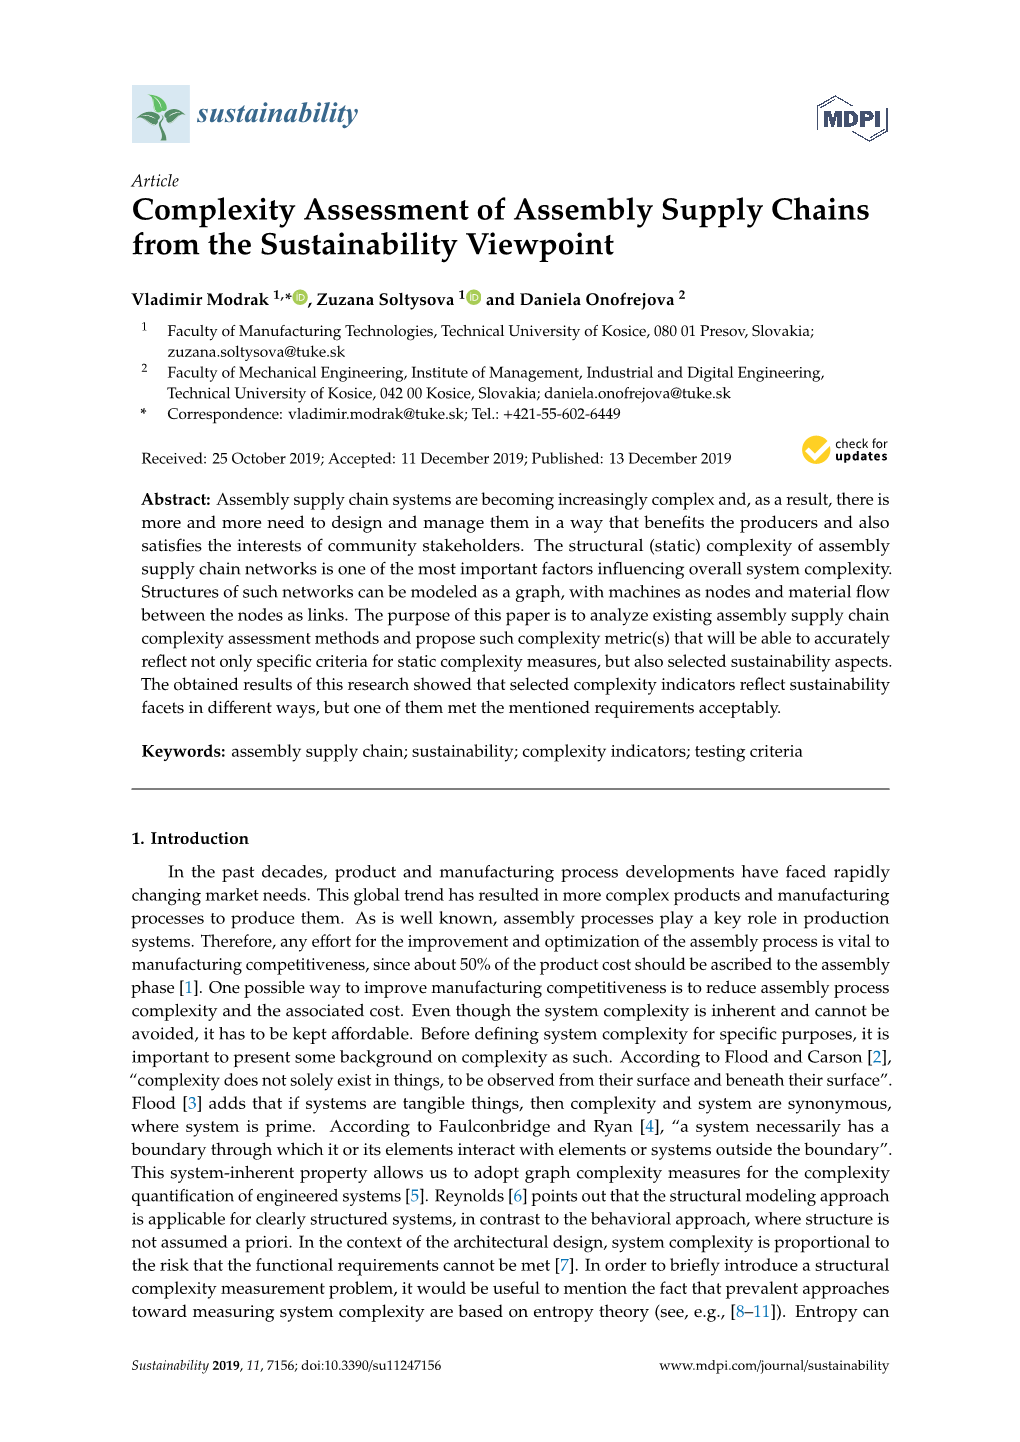 Complexity Assessment of Assembly Supply Chains from the Sustainability Viewpoint